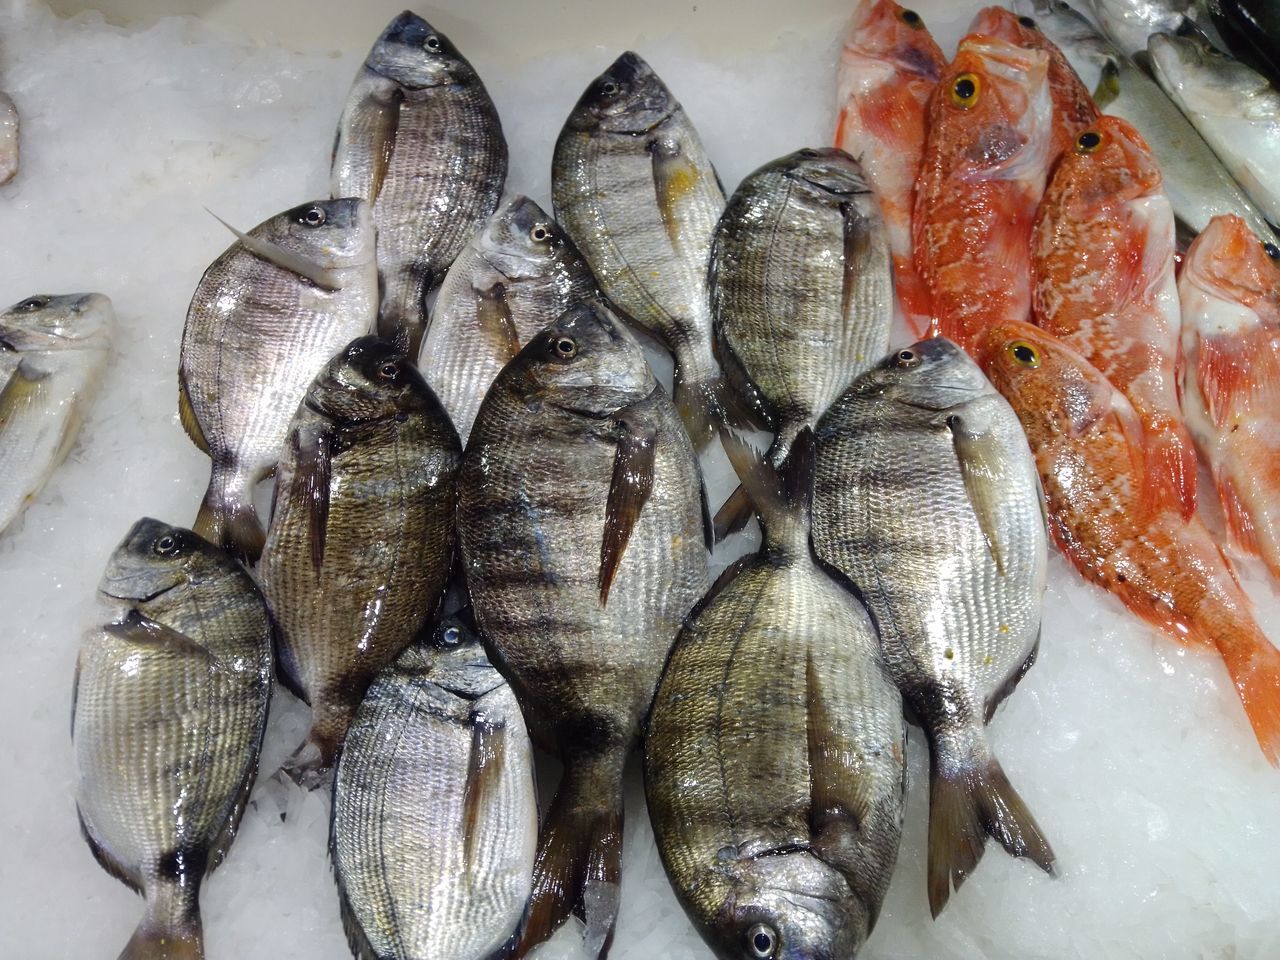 HIGH ANGLE VIEW OF FISH IN MARKET